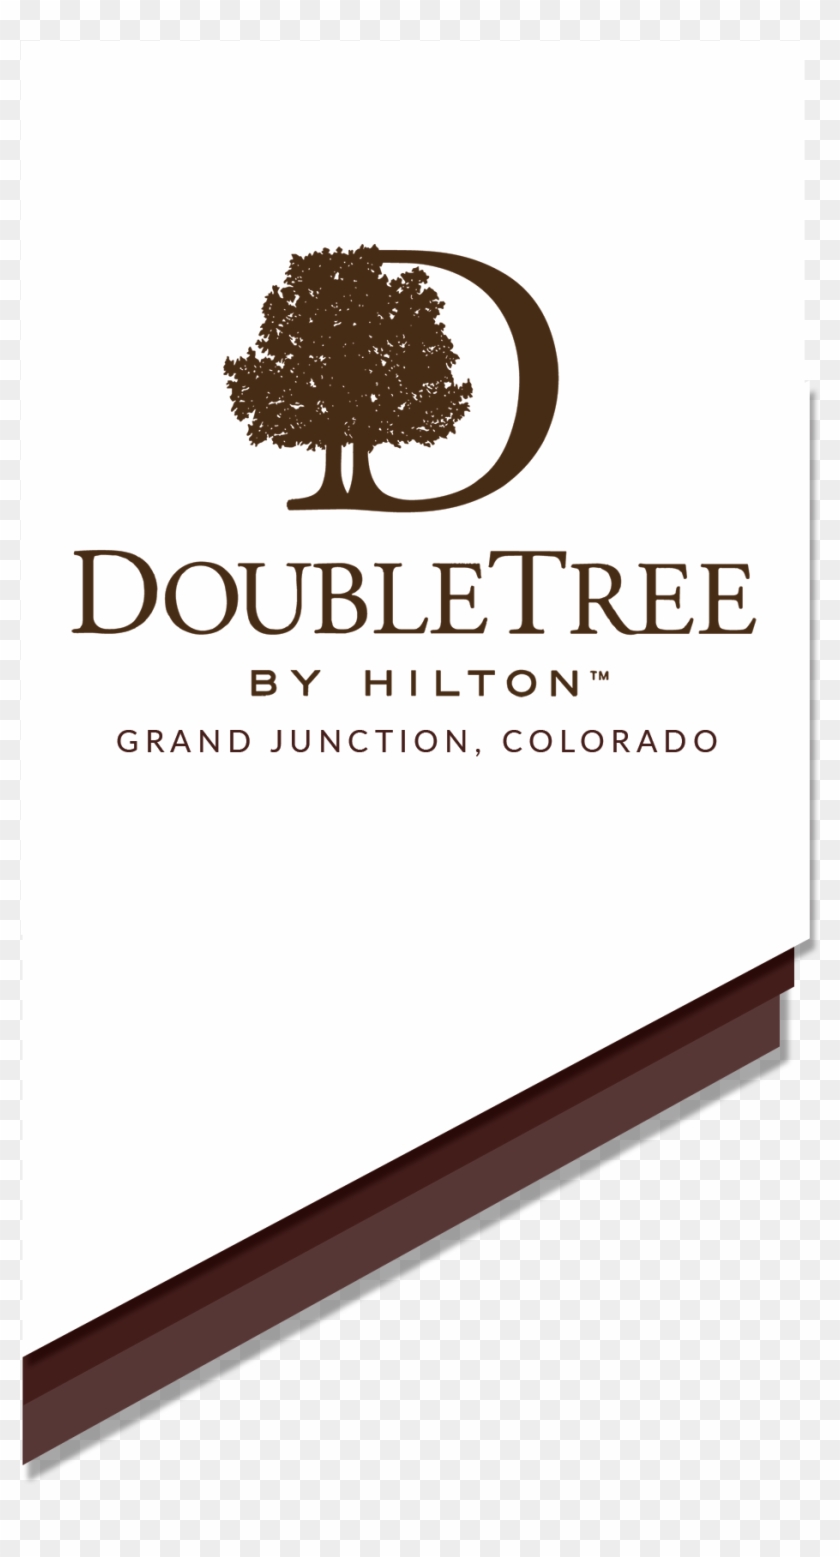 Doubletree By Hilton™ Hotel Grand Junction Colorado - Doubletree By Hilton Miri Clipart #2083636